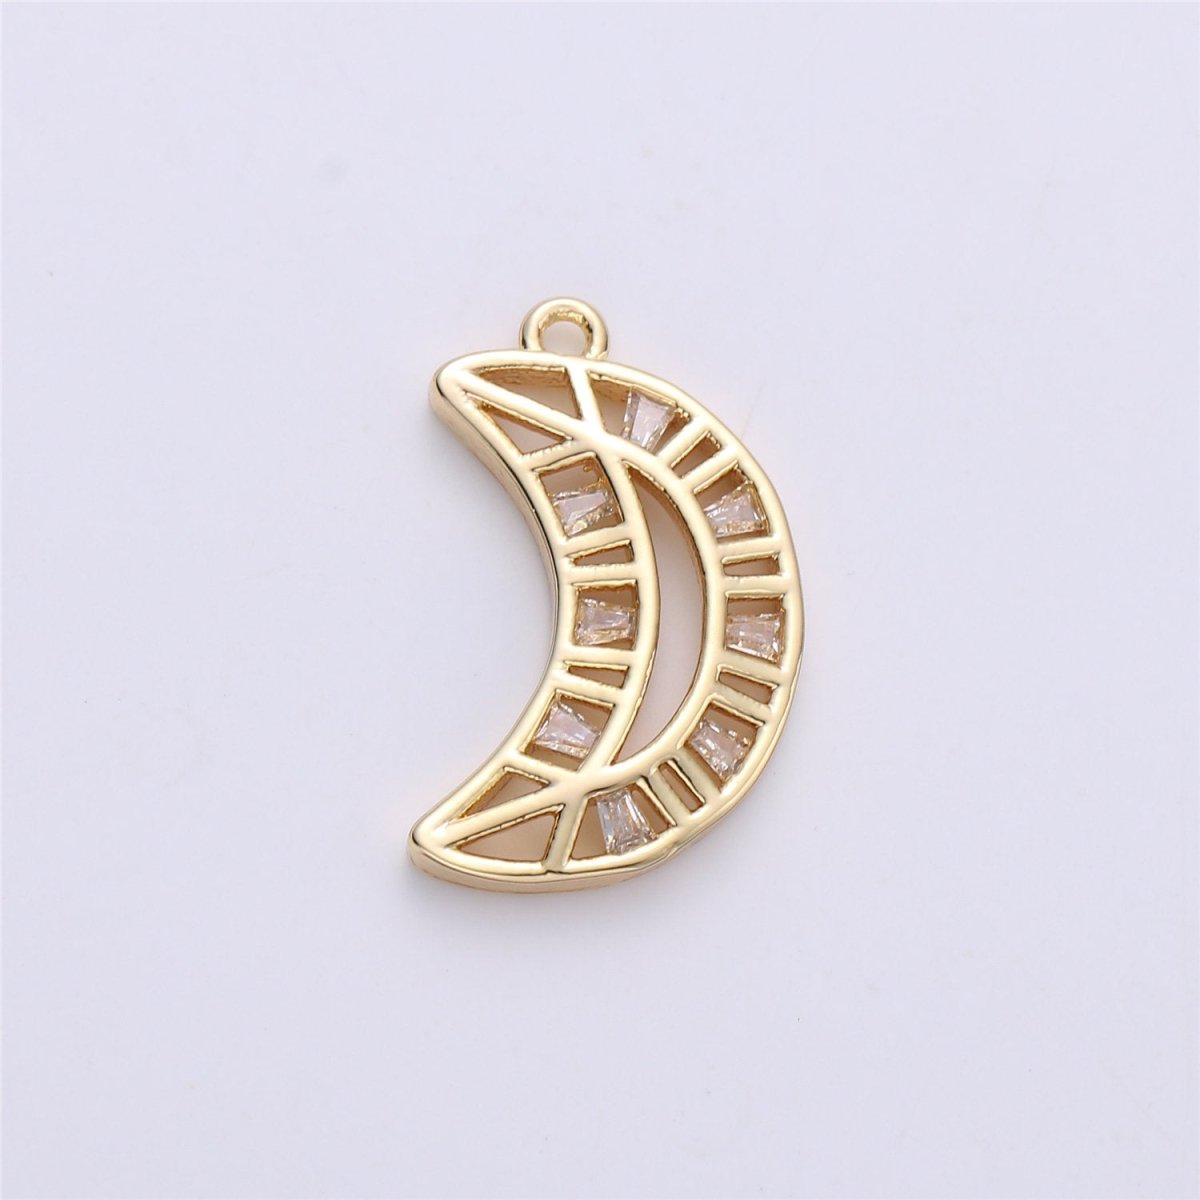 20mm Gold Moon Charm Cubic Pendant Gold filled Dainty Moon Origami Charm for Necklace Earring charmC-614 - DLUXCA